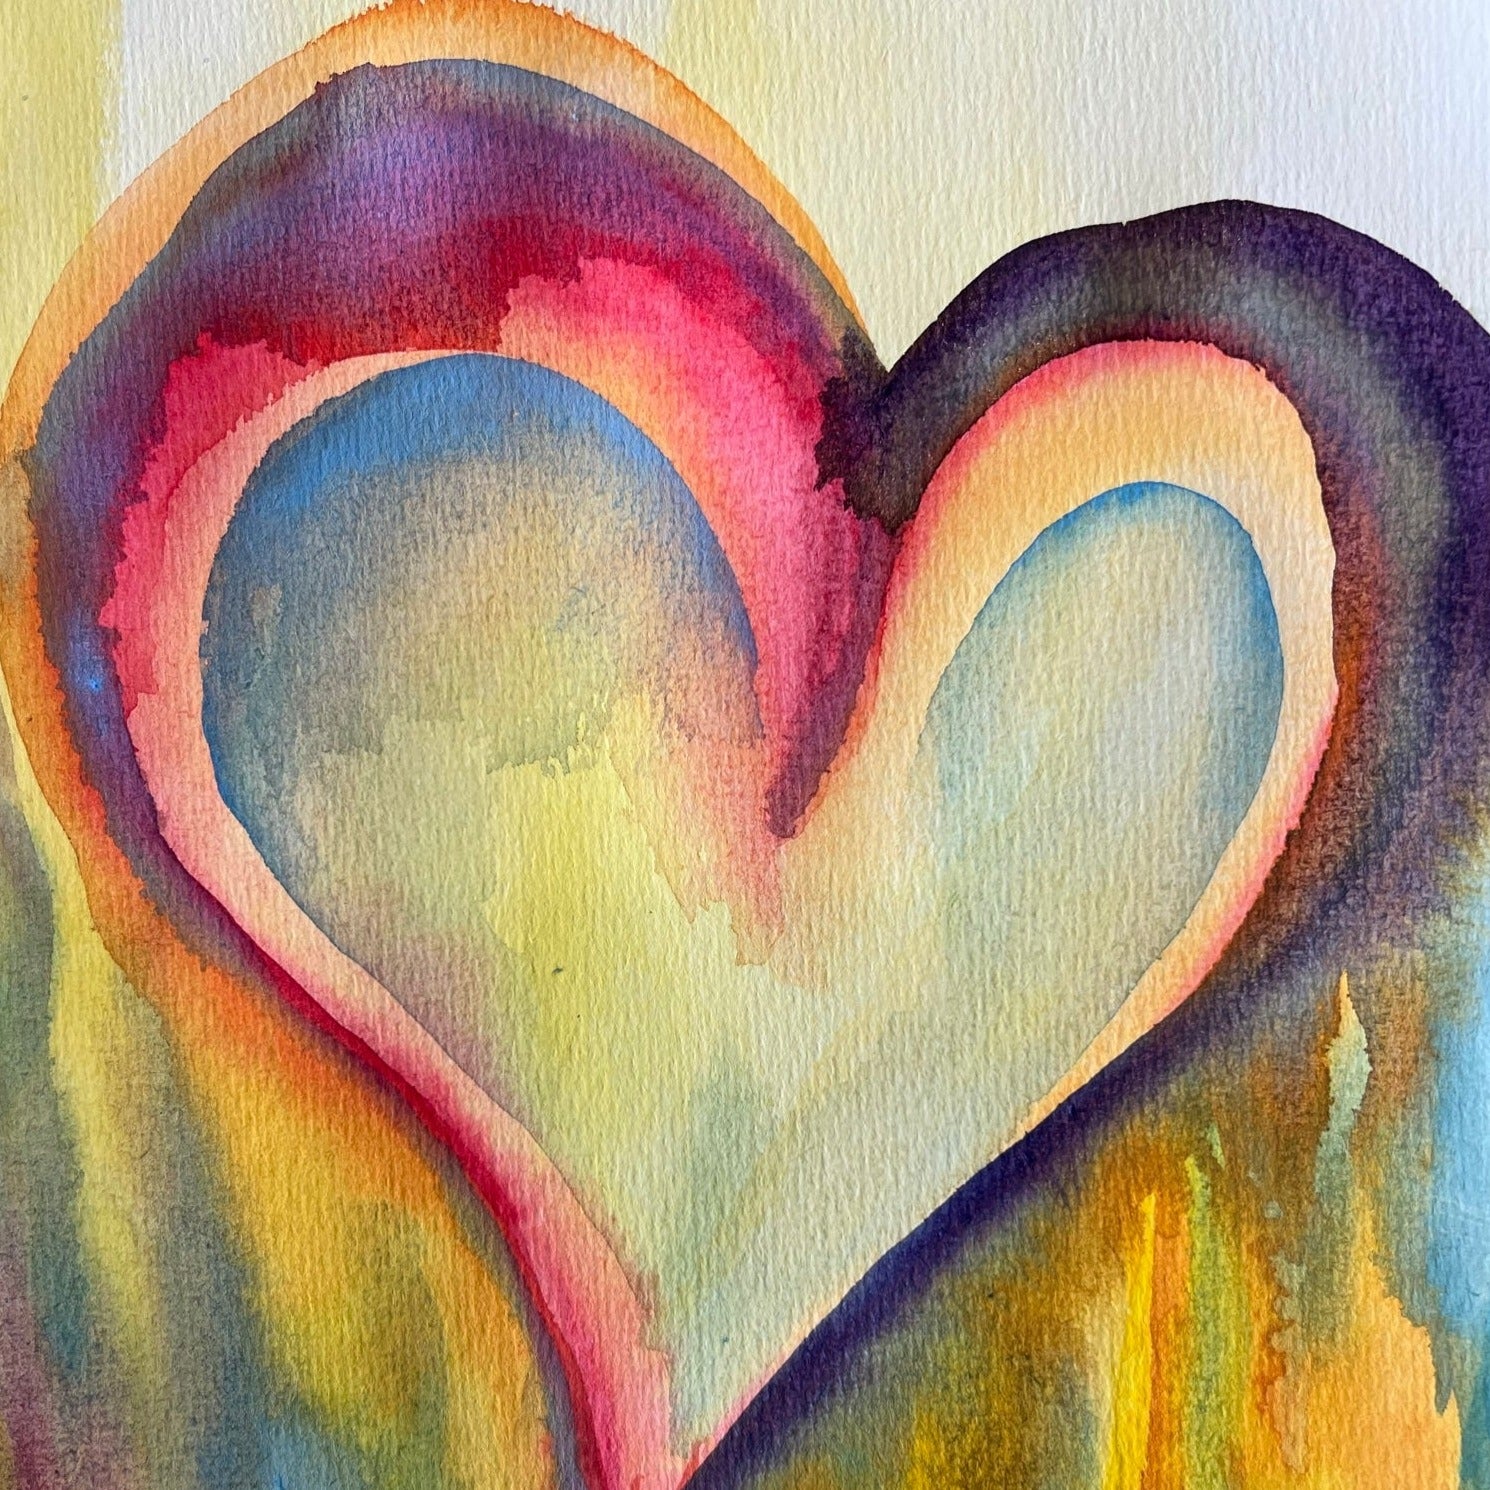 A large heart painted with watercolors and rice paper